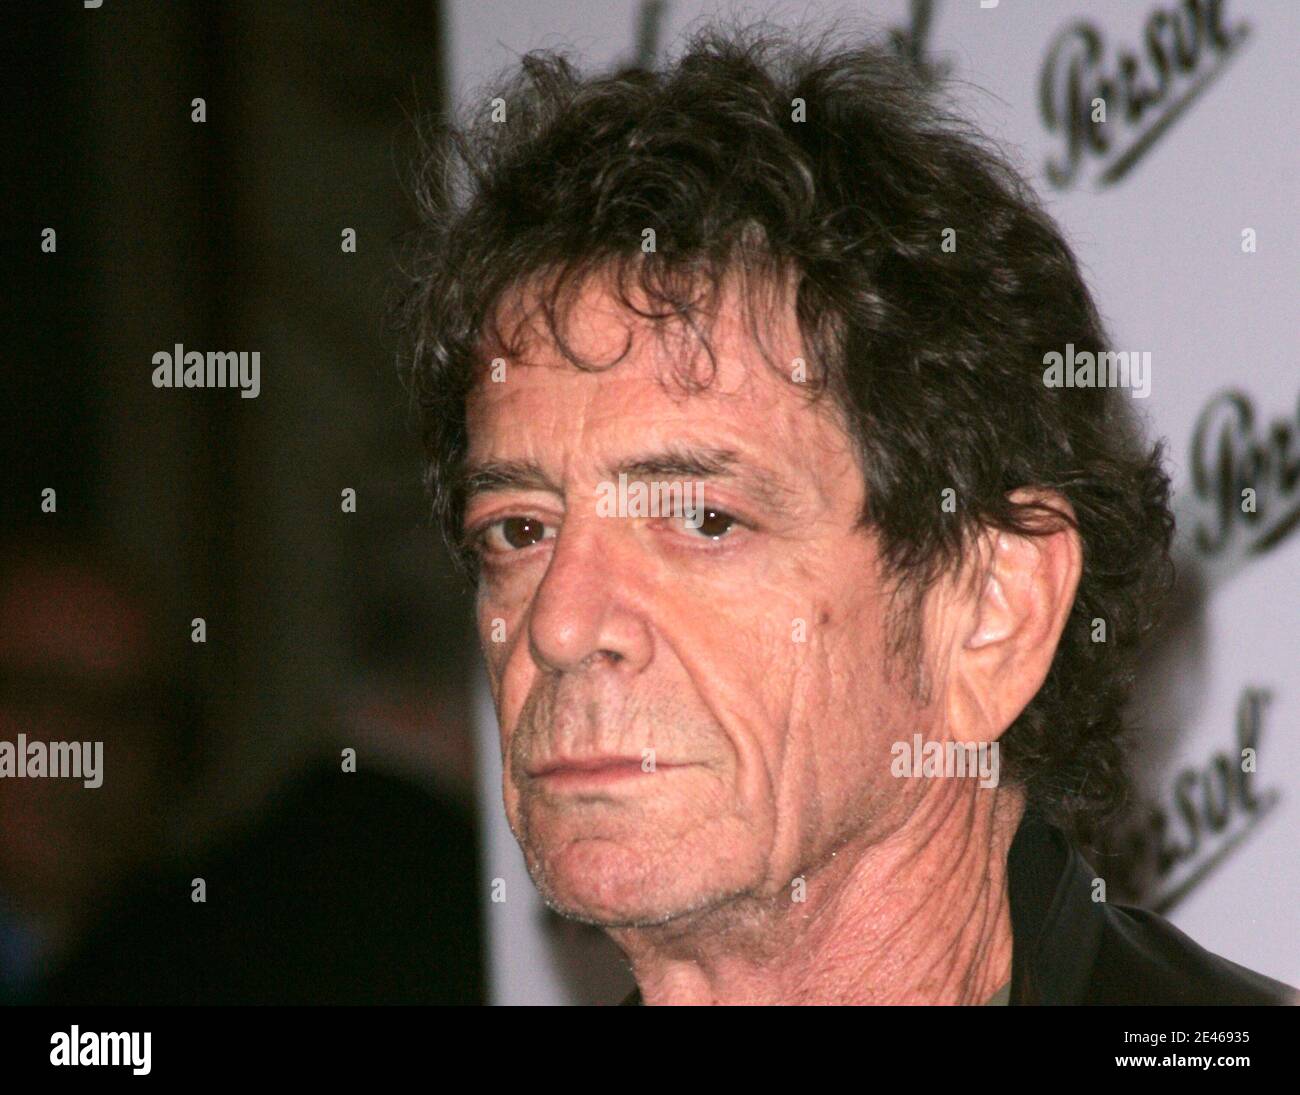 Singer Lou Reed arriving at the 'Incognito Design Exhibition' at the Whitney Museum of American Art in New York City, NY, USA on June 23, 2009. Photo by Donna Ward/ABACAPRESS.COM Stock Photo